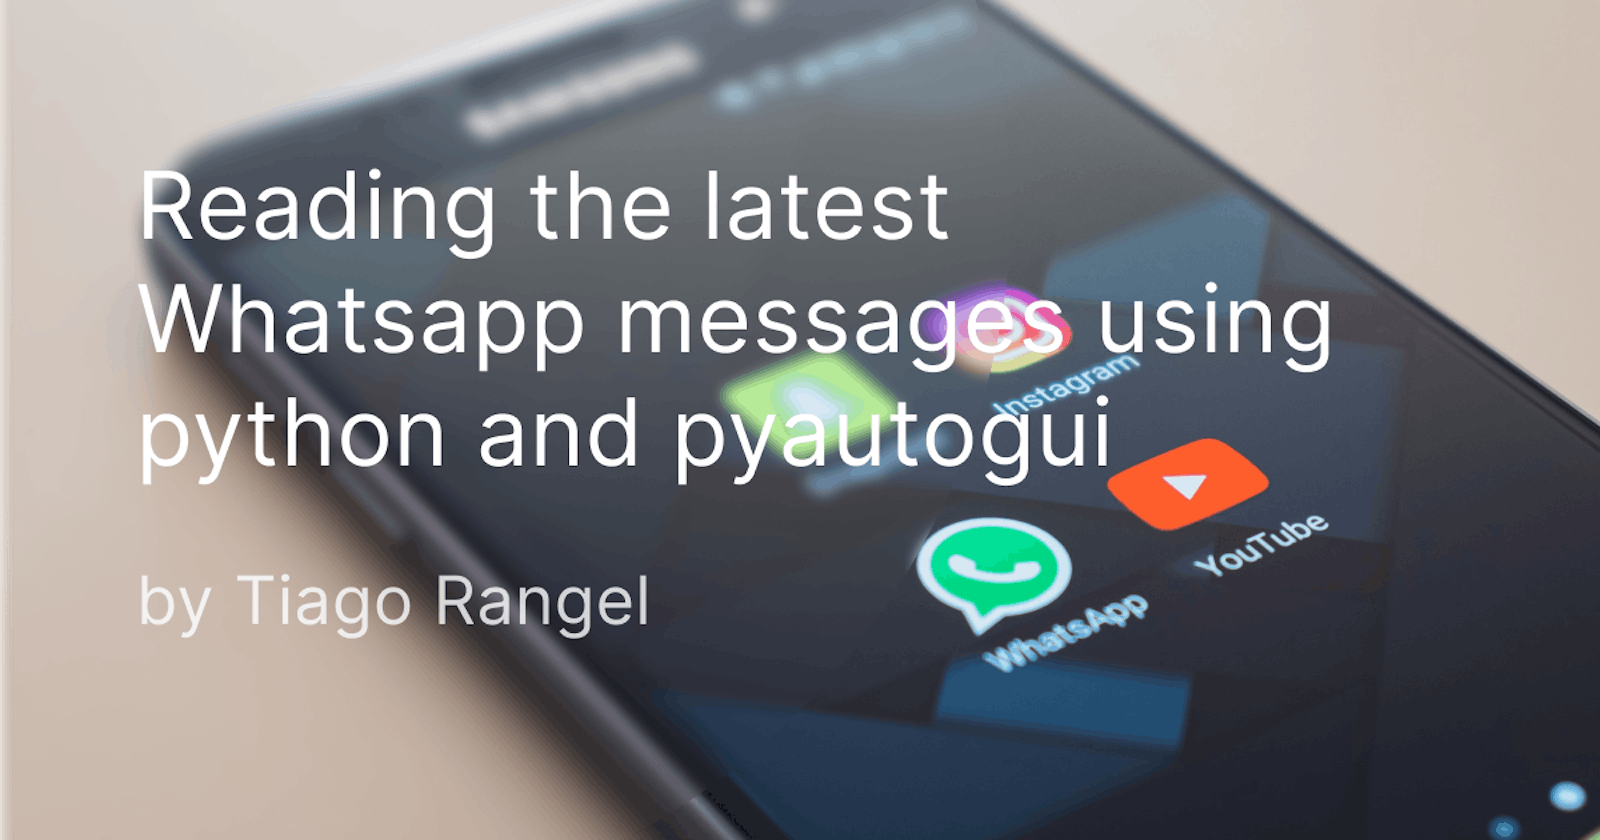 Reading the latest Whatsapp messages using python and pyautogui